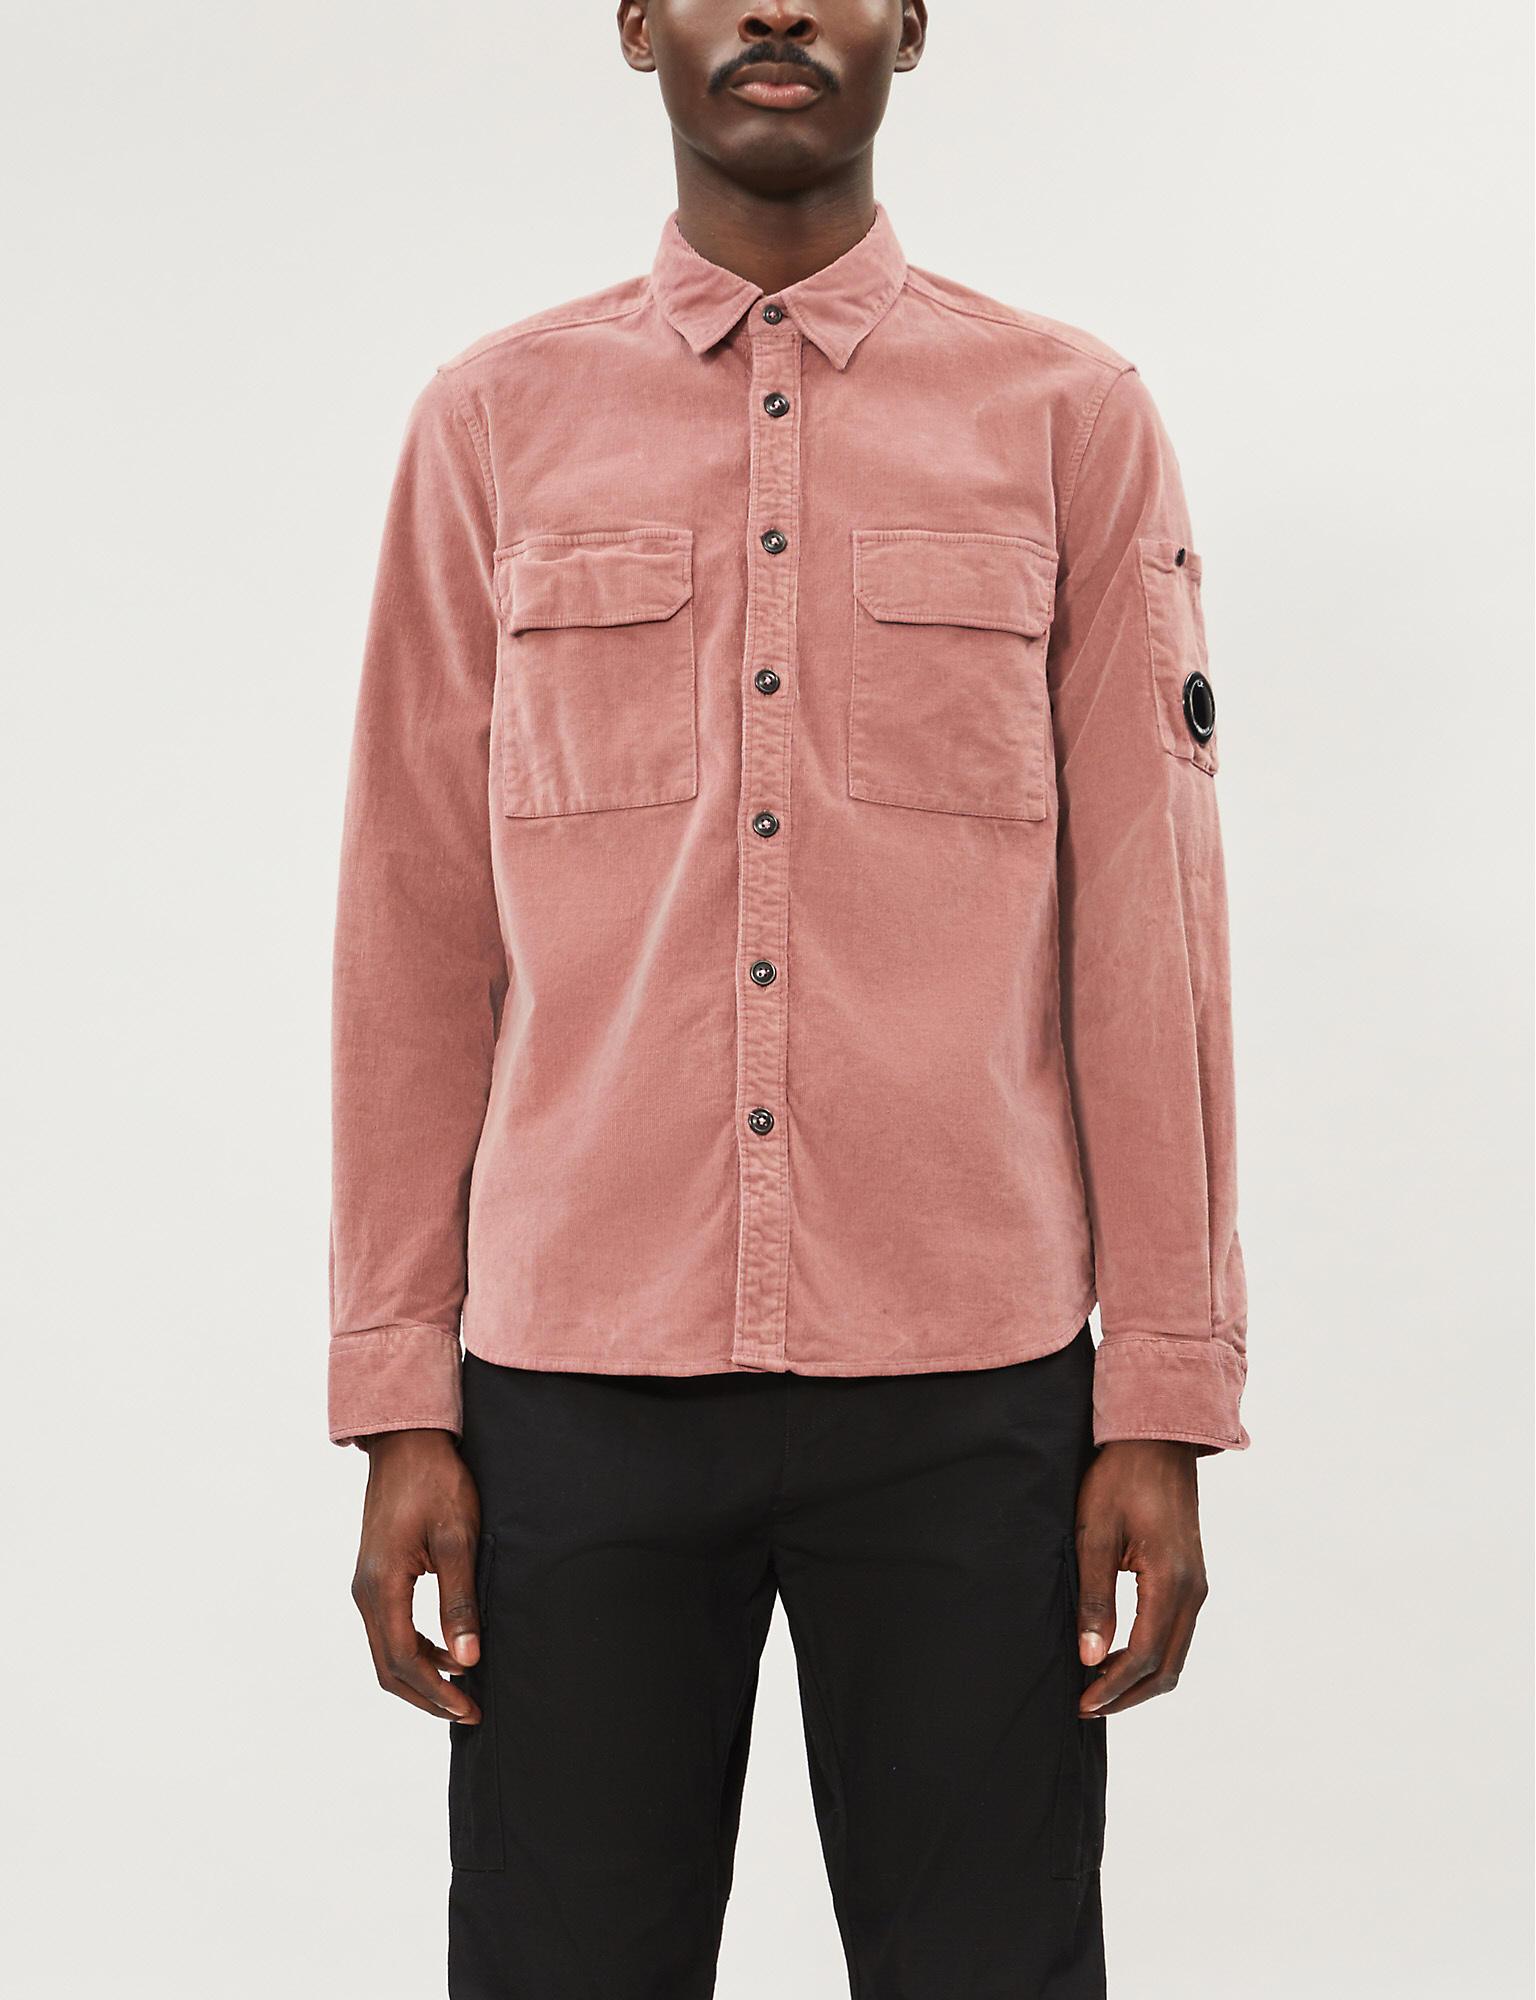 C.P. Company Regular-fit Stretch-corduroy Overshirt in Pink for Men - Lyst